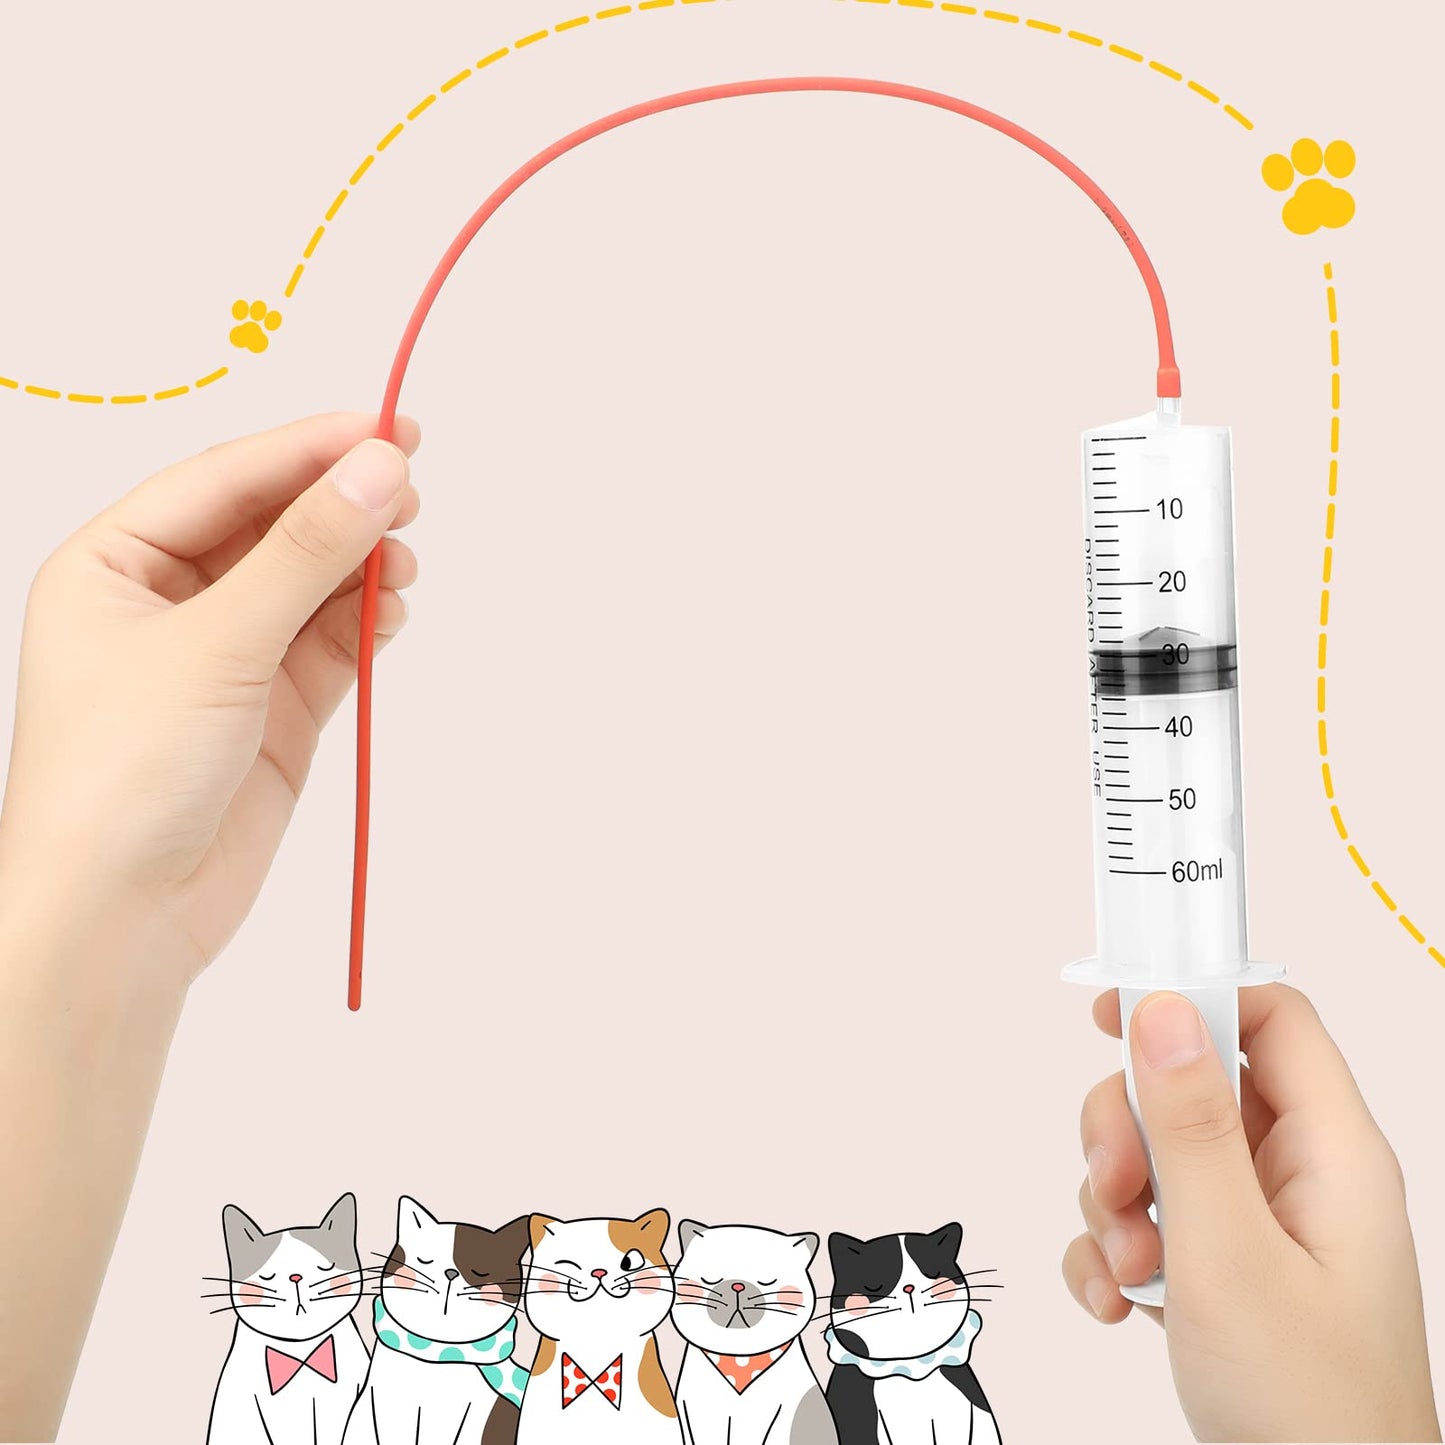 9 Pieces Puppy Feeding Tube Kit Includes 8 FR Red Rubber Kitten Feeding Tubes 10 ml Clear Feeding Tube Syringes Bulb Syringe Feeding Tools for Small Animals Pet Supplies Feeding Measuring Watering